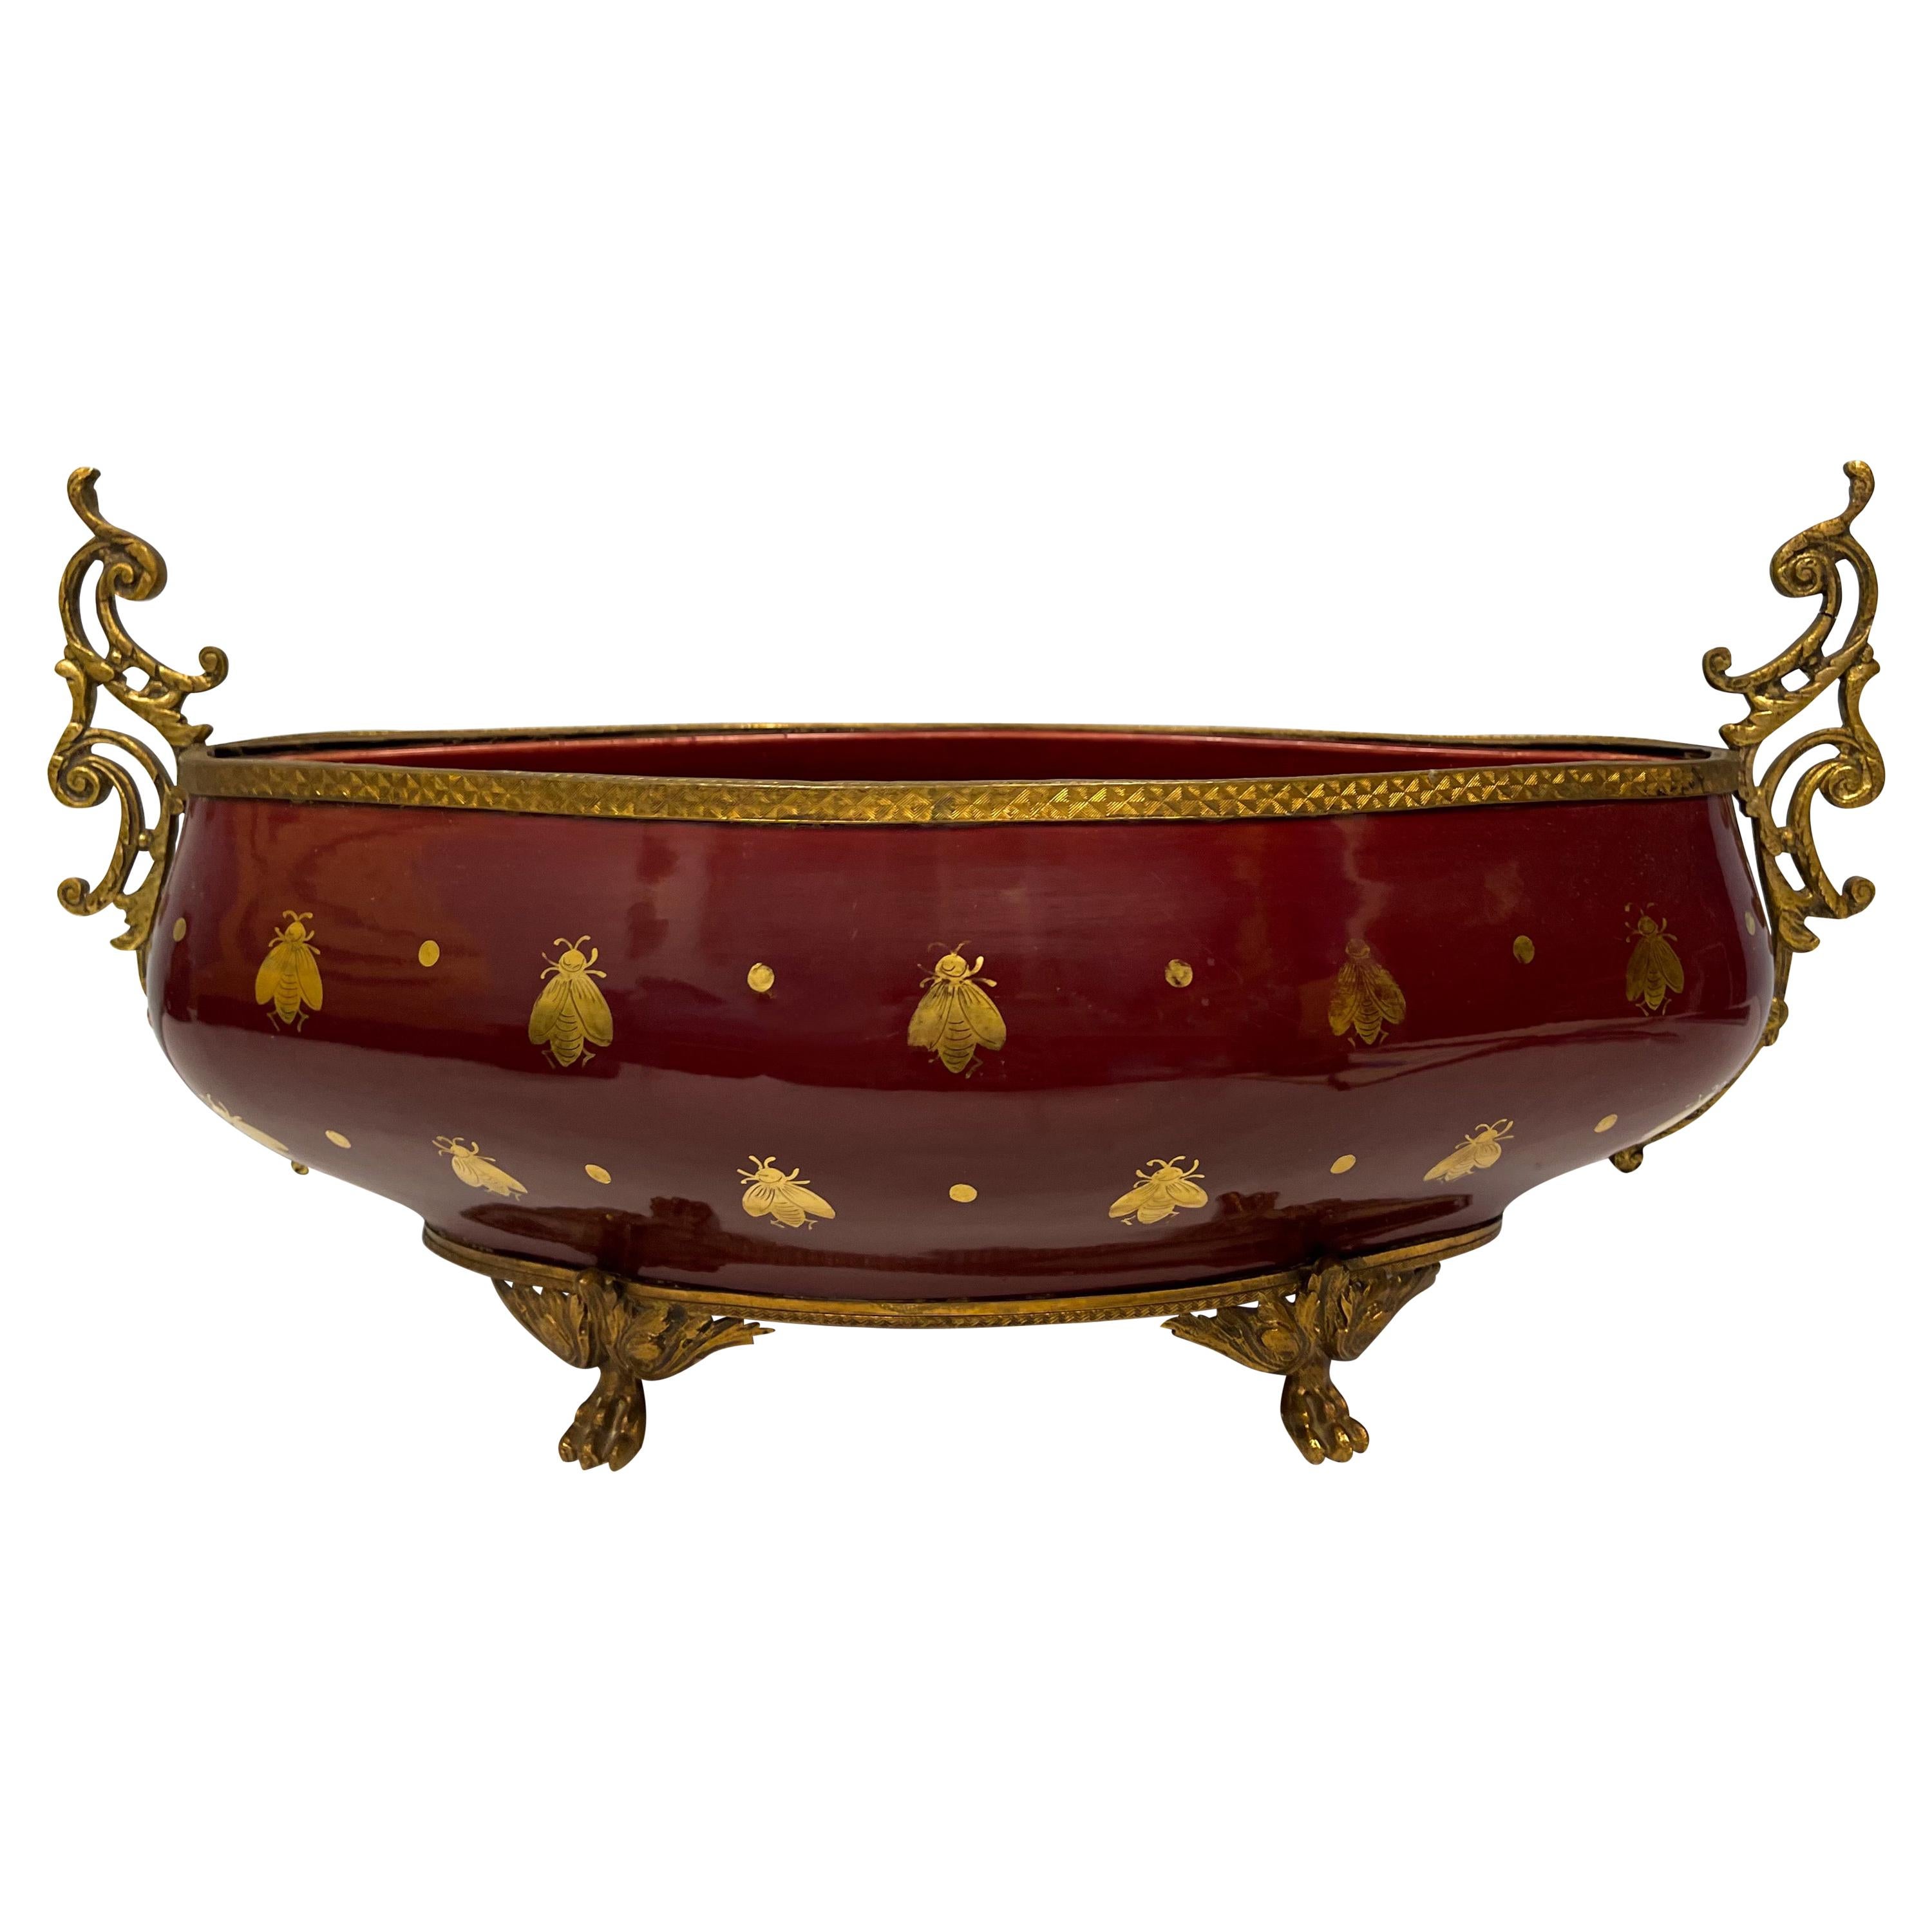 19th C. French Empire Gilt Bronze Jardiniere with Napoleonic Bee Motif For Sale